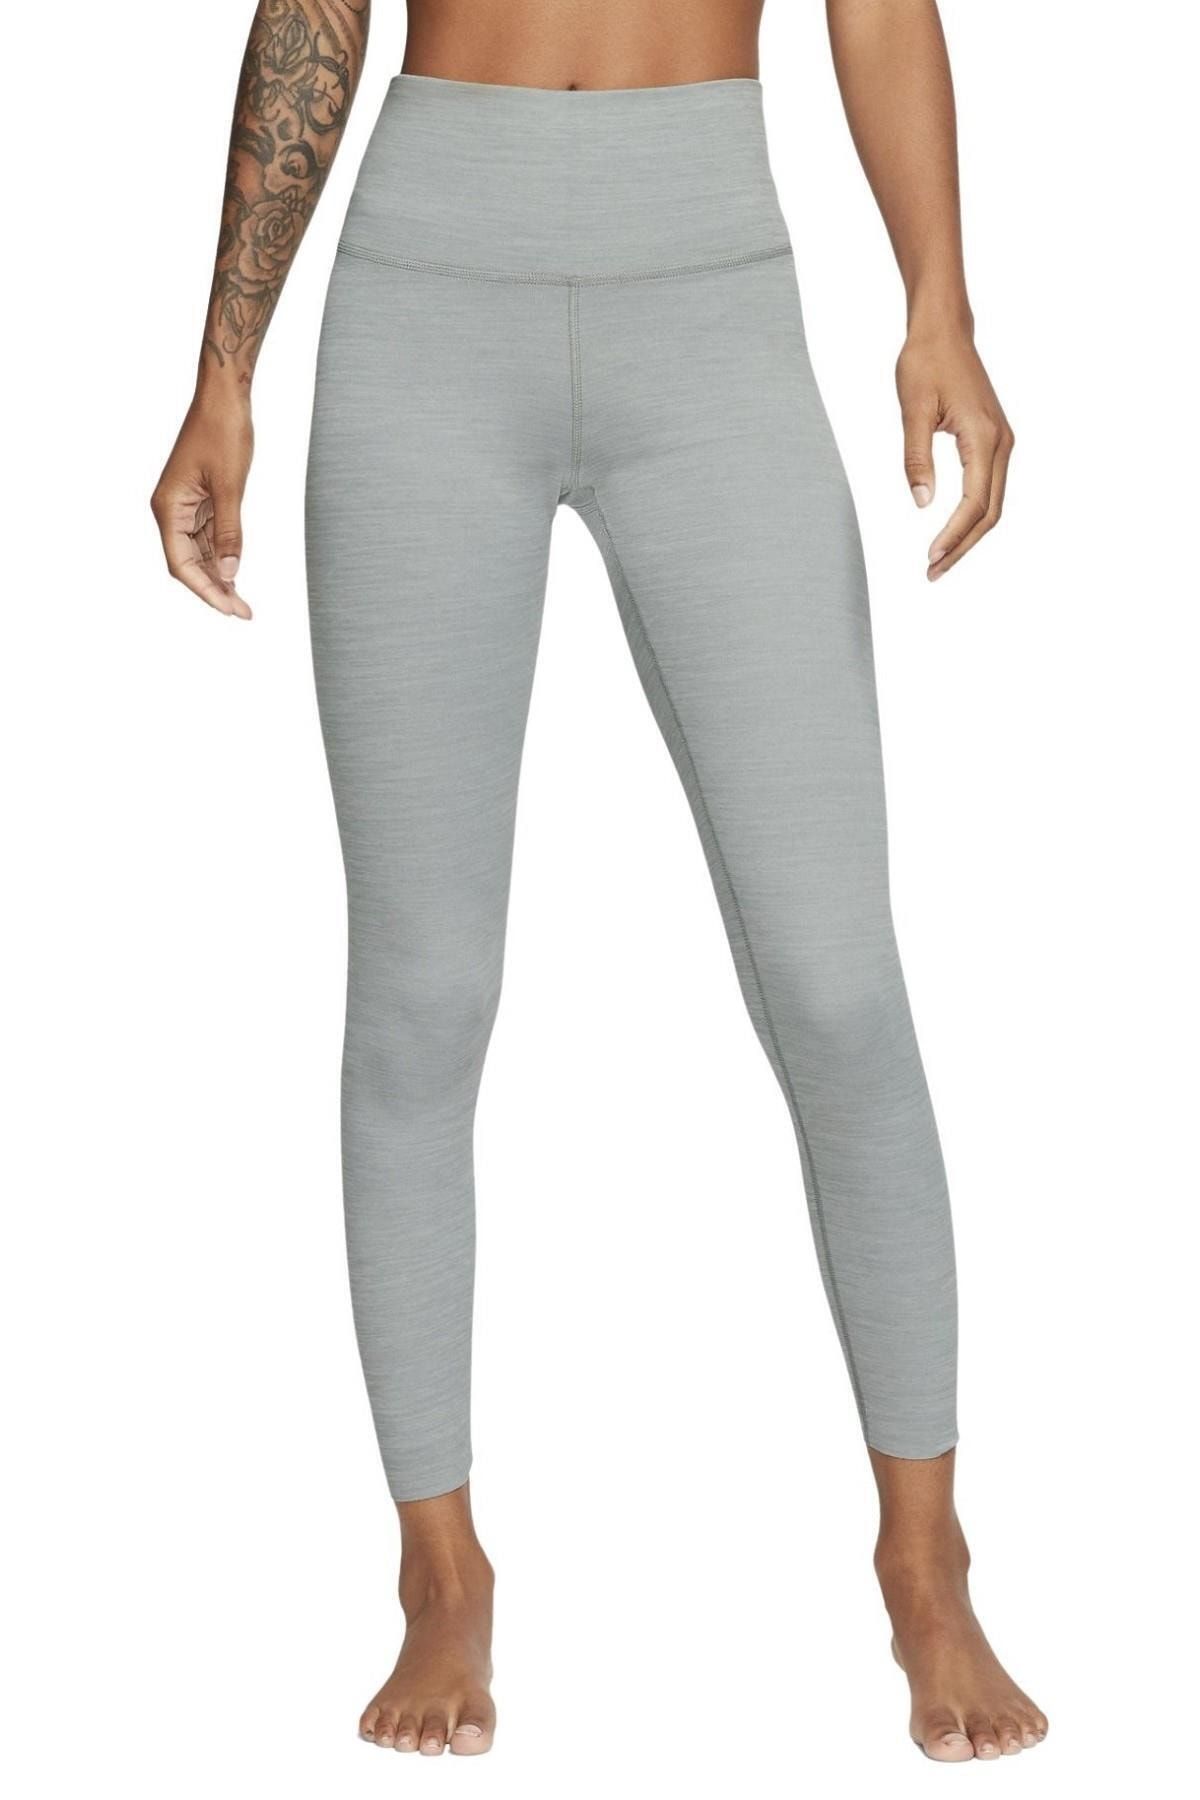 Nike Yoga Luxe Infinalon High Rise High Waisted 7/8 Size Gray